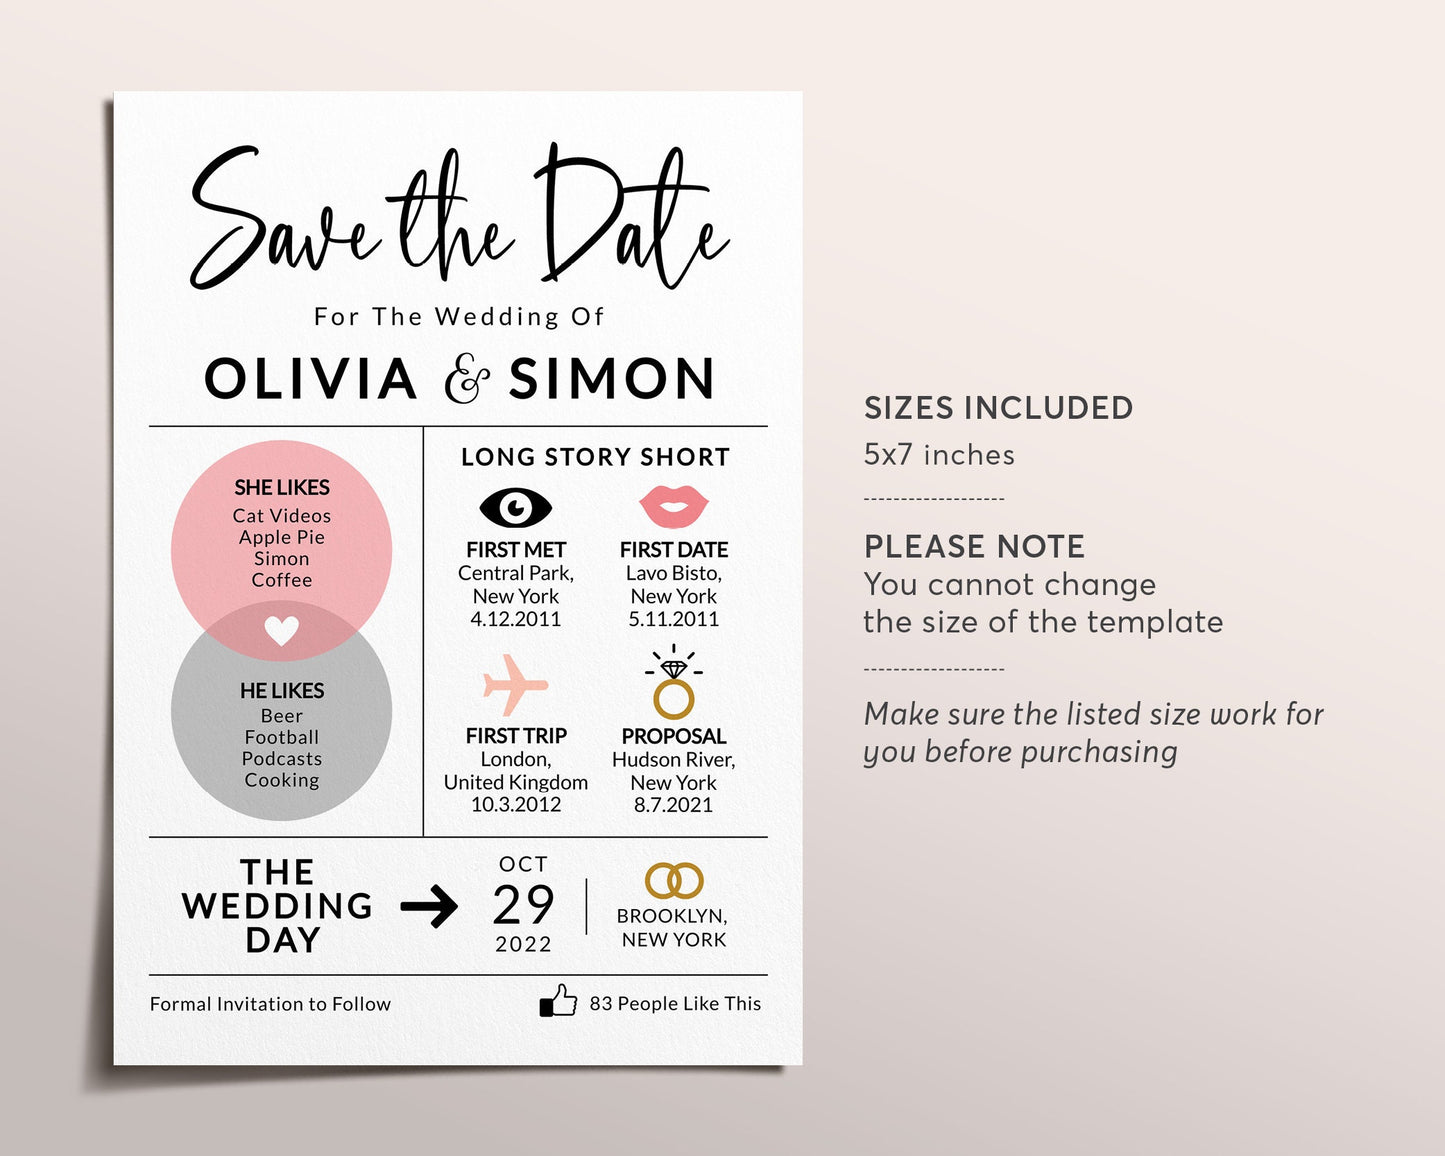 Save the Date Wedding Template Editable, Long Story Short Save the Date Printable, Modern Wedding Infographic, Wedding Invitation